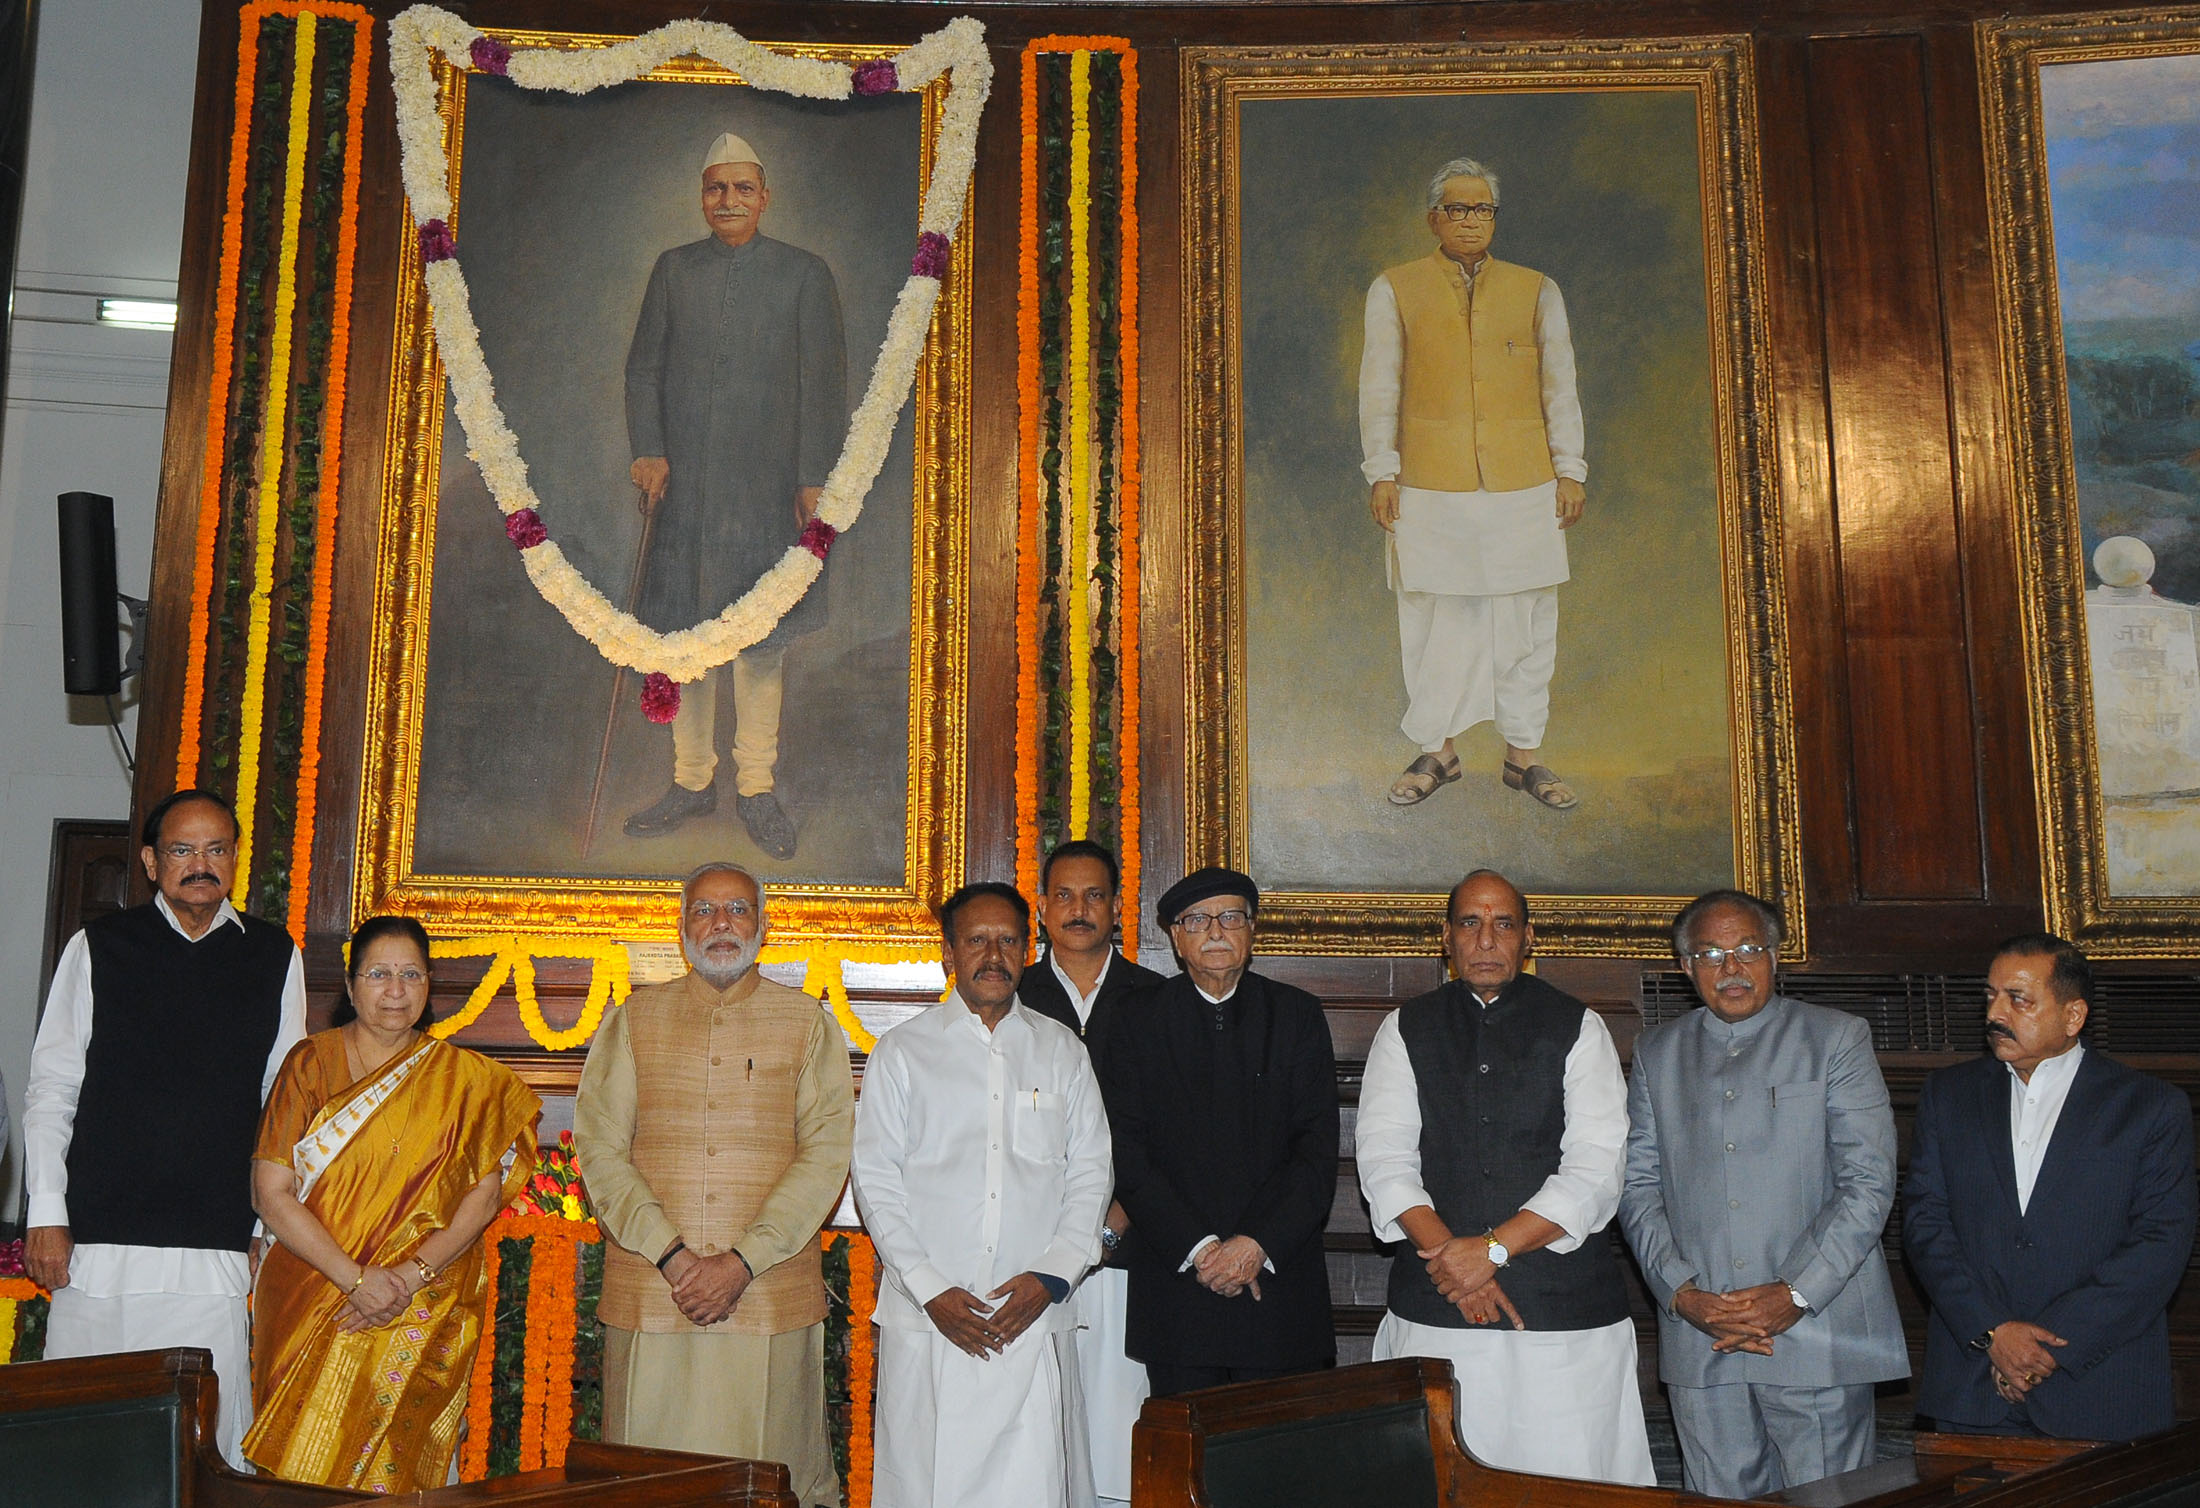 The Prime Minister, Shri Narendra Modi, the Speaker, Lok Sabha, Smt. Sumitra Mahajan, the Union Home Minister, Shri Rajnath Singh, the Union Minister for Urban Development, Housing and Urban Poverty Alleviation and Parliamentary Affairs, Shri M. Venkaiah Naidu and other dignitaries paid homage, at the portrait of the former President, Late Dr. Rajendra Prasad on the occasion of his 131st birth anniversary, at Parliament House, in New Delhi on December 03, 2015.